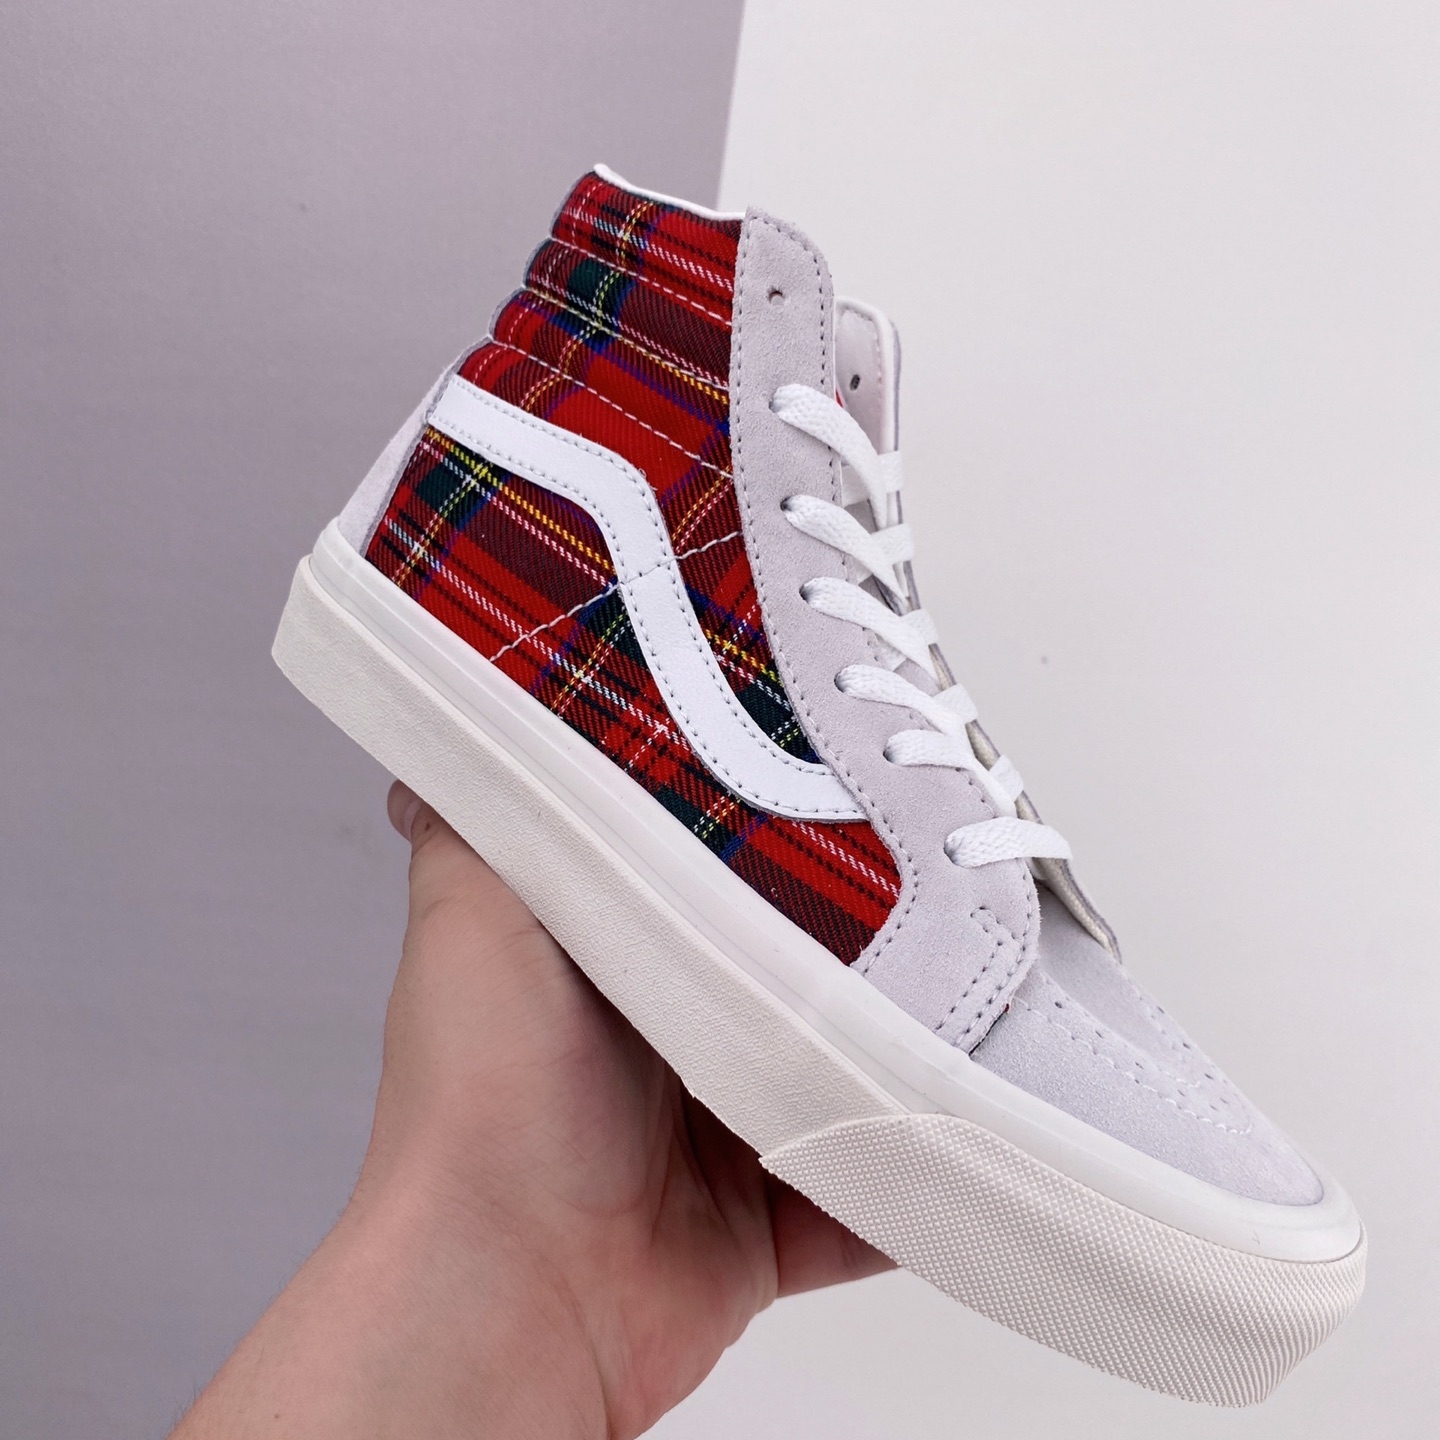 Pendleton x Vans Unisex Style 38 Sneakers Red White VN0A38GF9GT - Limited Edition Comfort and Style